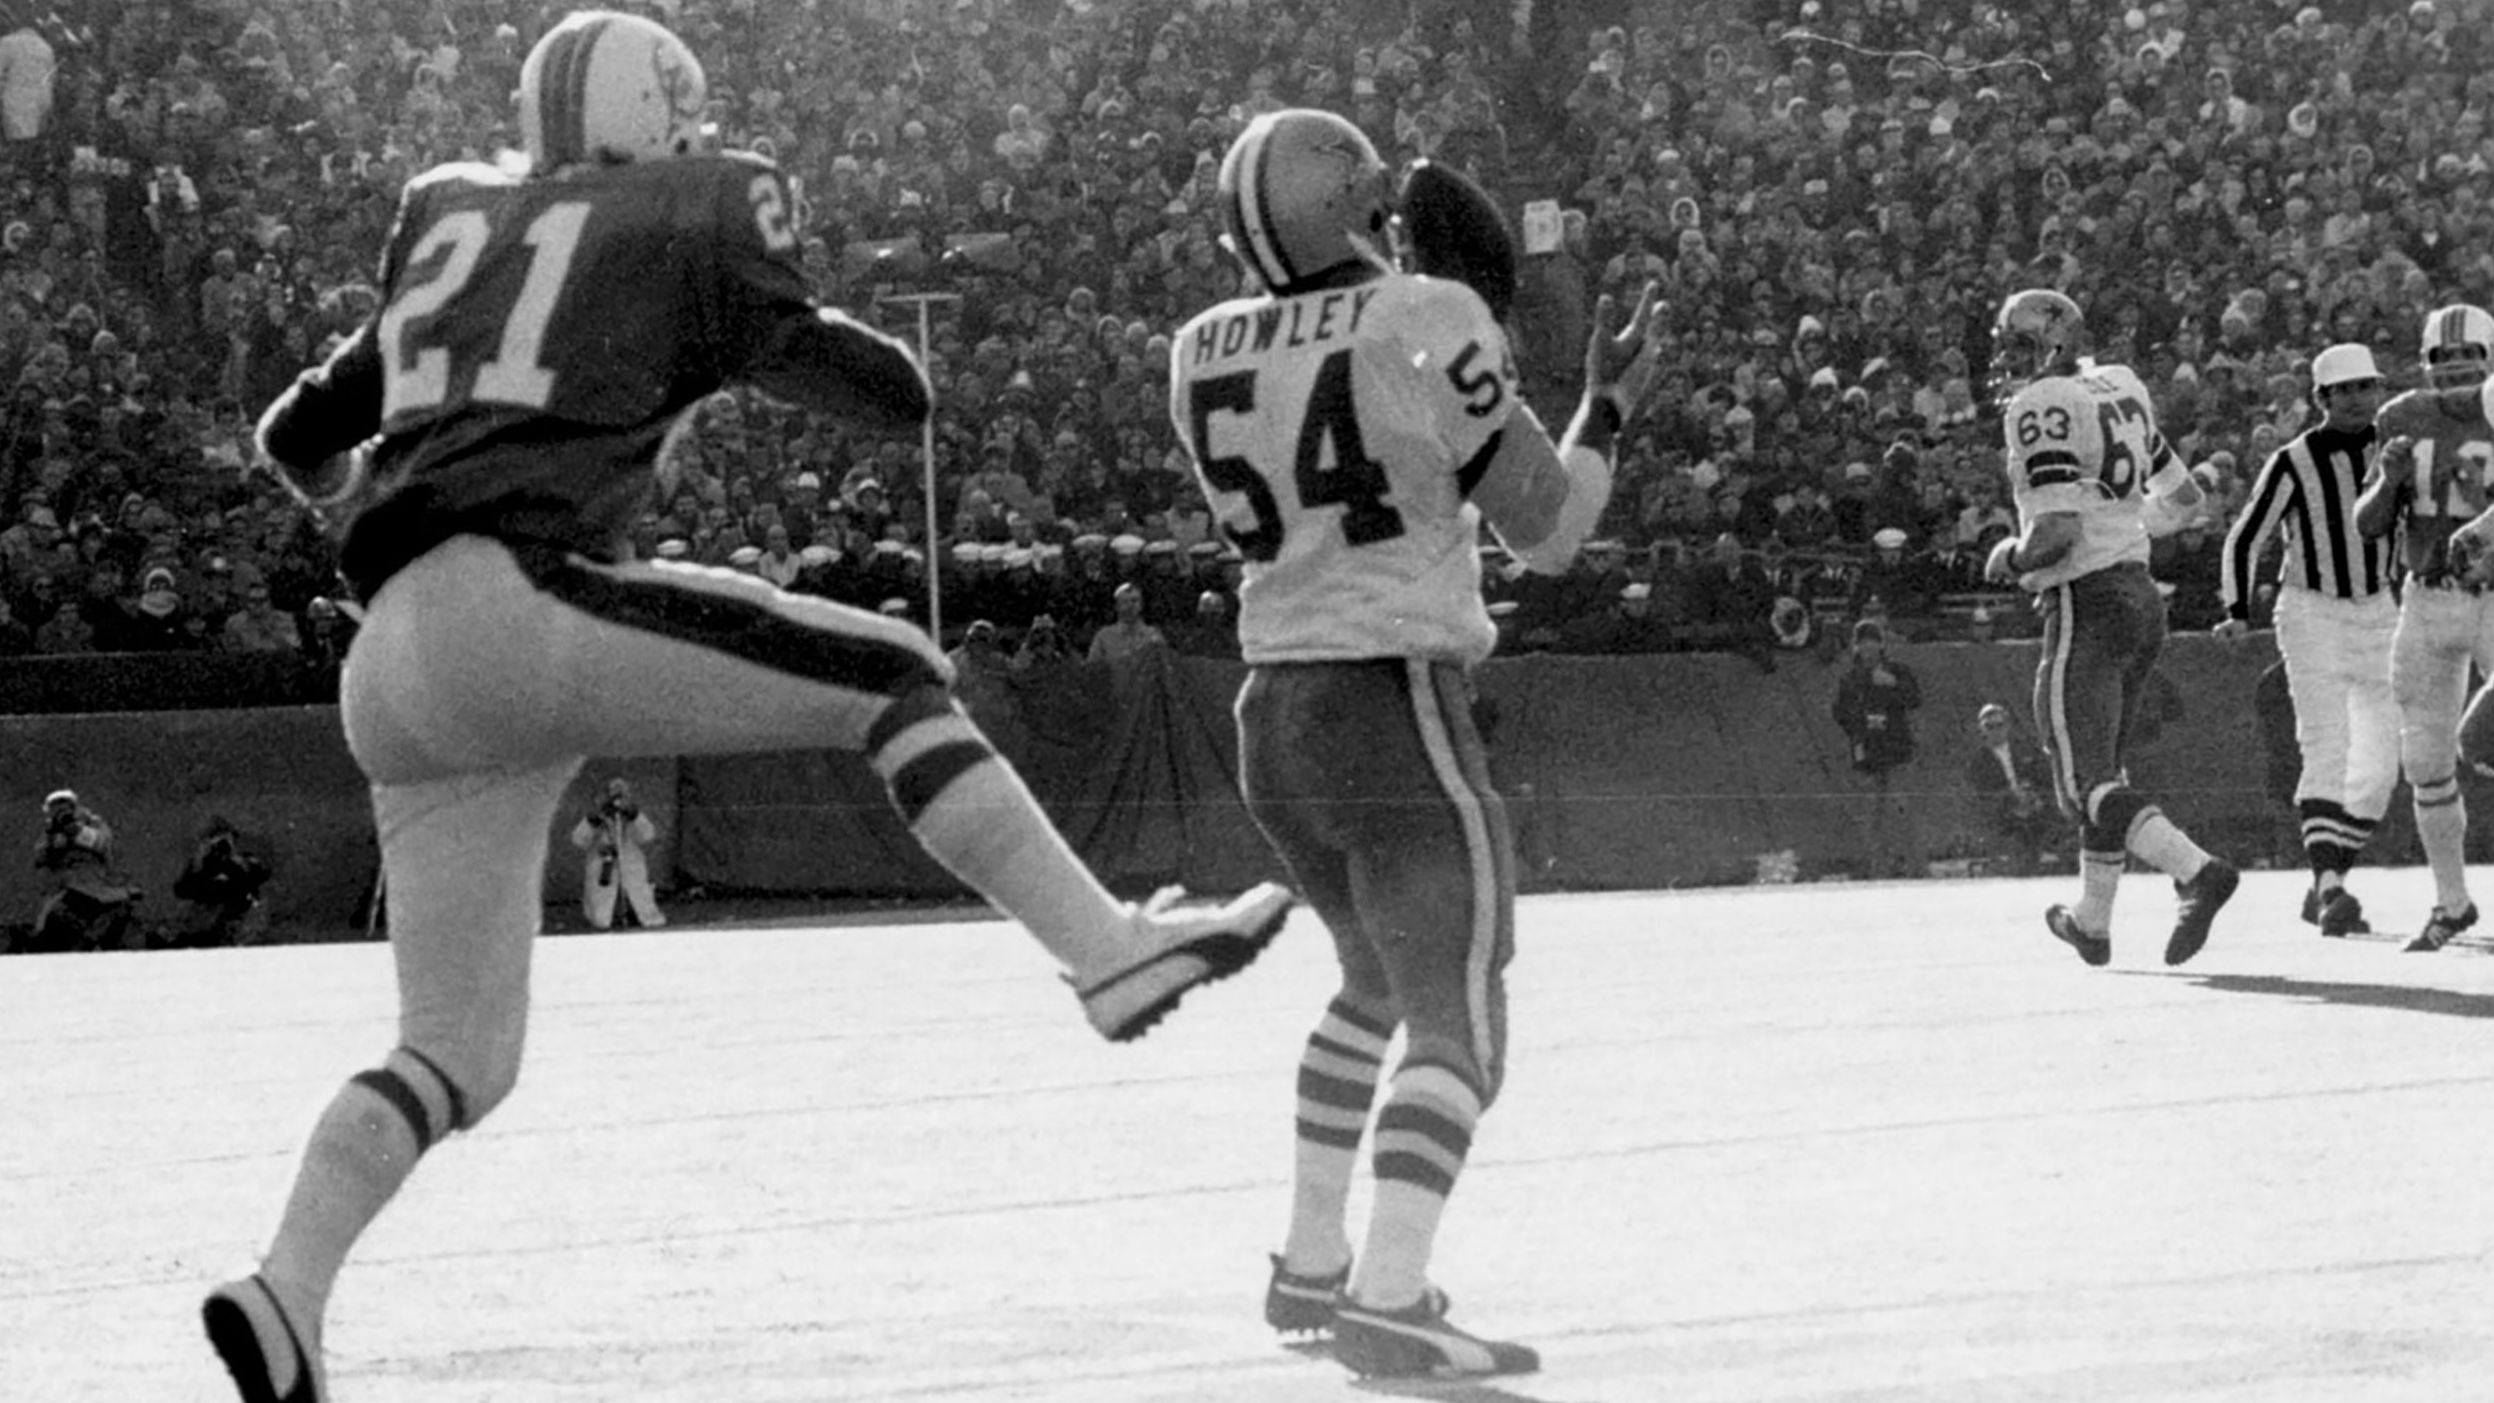 <strong>Super Bowl V (1971):</strong> Dallas Cowboys linebacker Chuck Howley intercepted two passes against the Baltimore Colts in Super Bowl V. Howley was named the game's MVP, but the Colts won the notoriously sloppy game with a Jim O'Brien field goal as time expired. To date, Howley remains the only player from a losing team to be named Super Bowl MVP. 